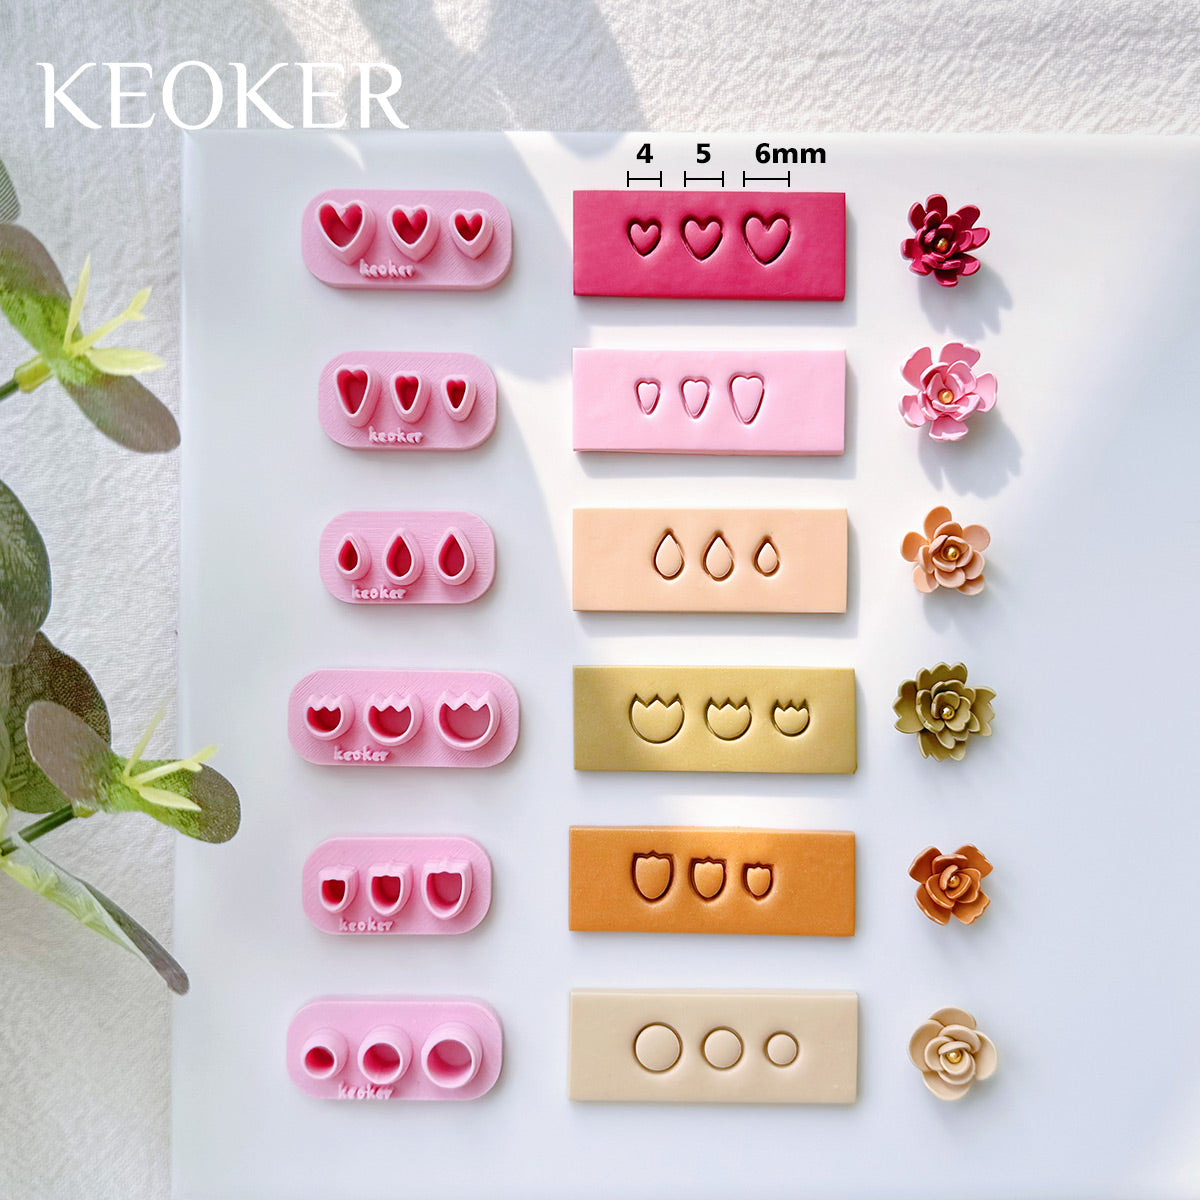 KEOKER Frame Polymer Clay Cutters(12 Shapes)